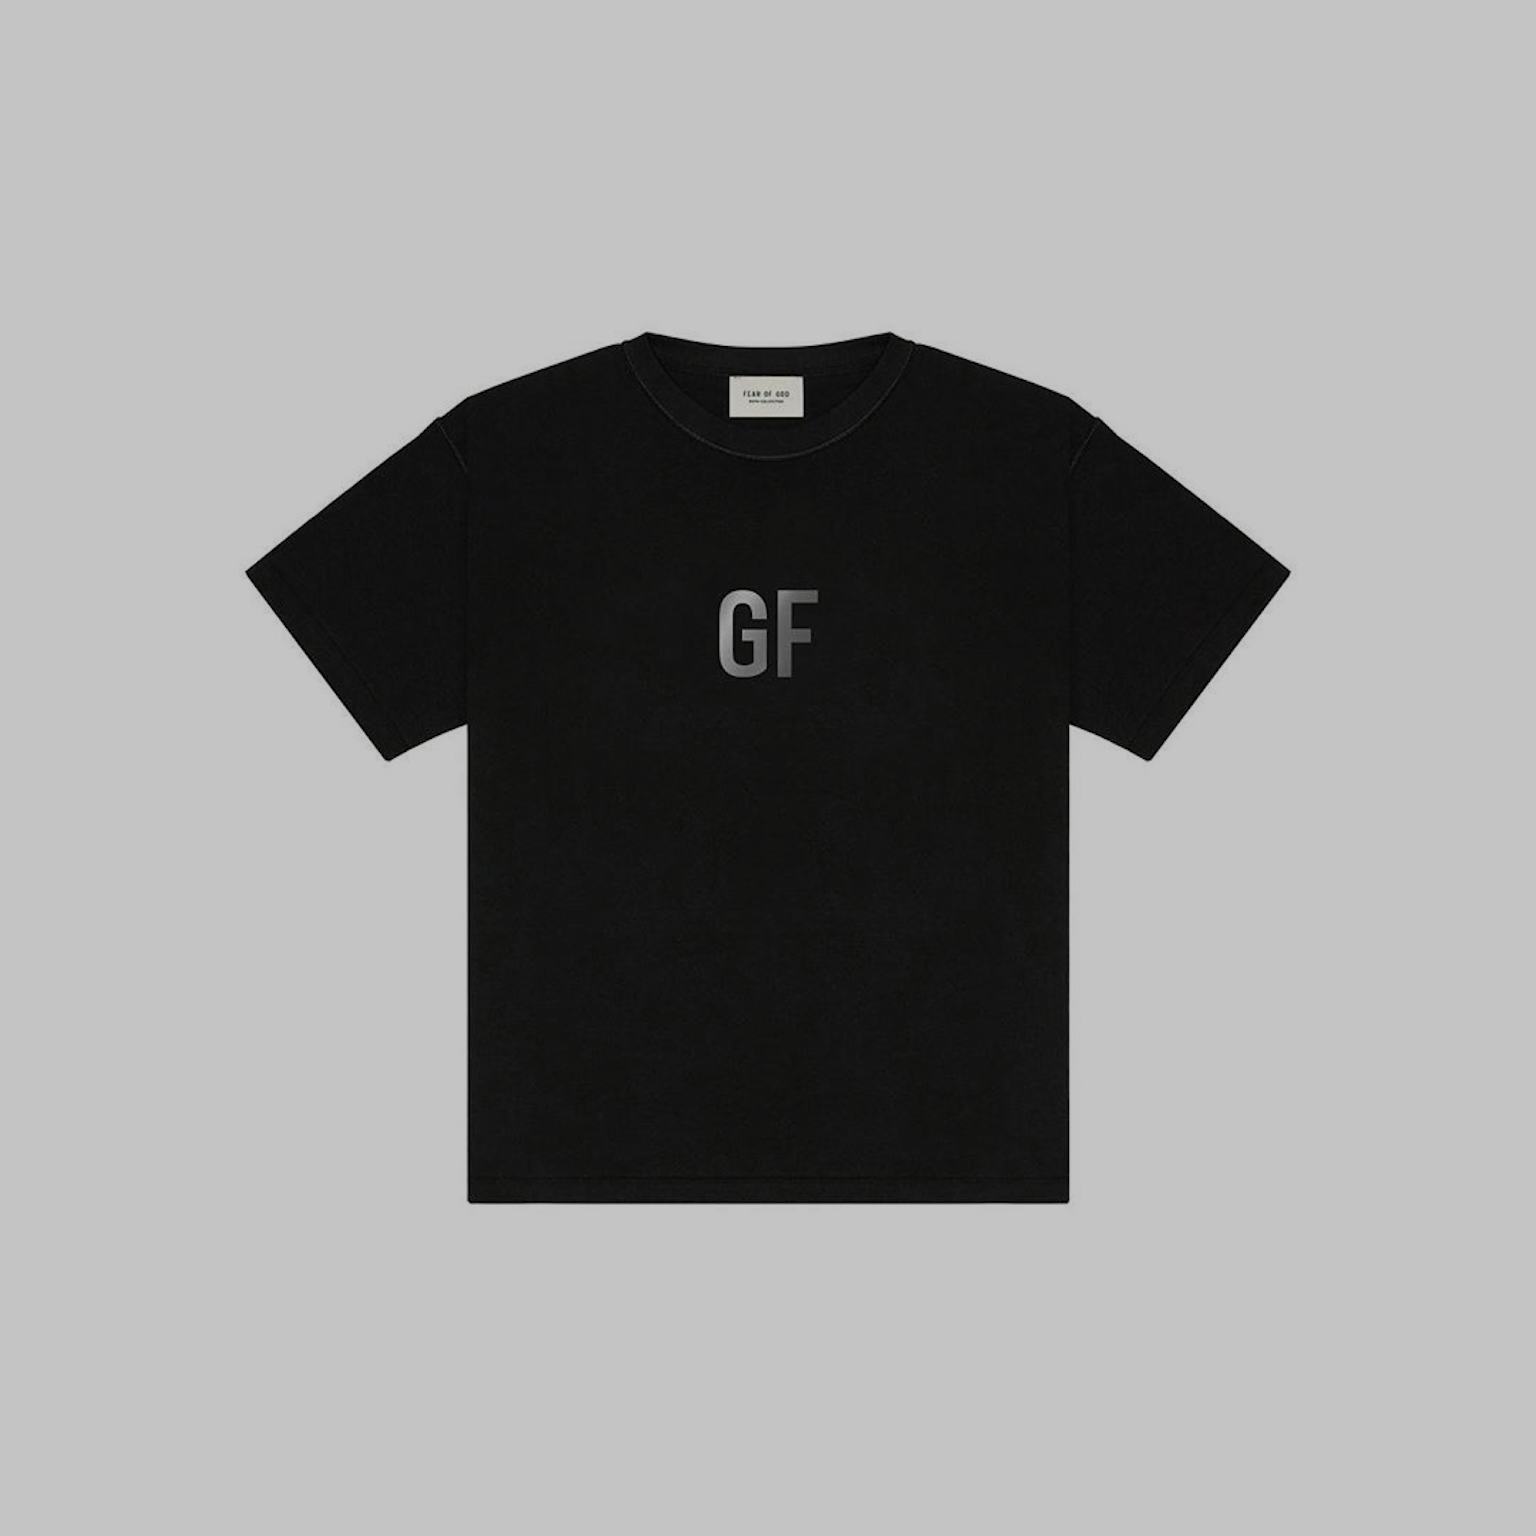 Some of the hottest streetwear brands are making a George Floyd ...